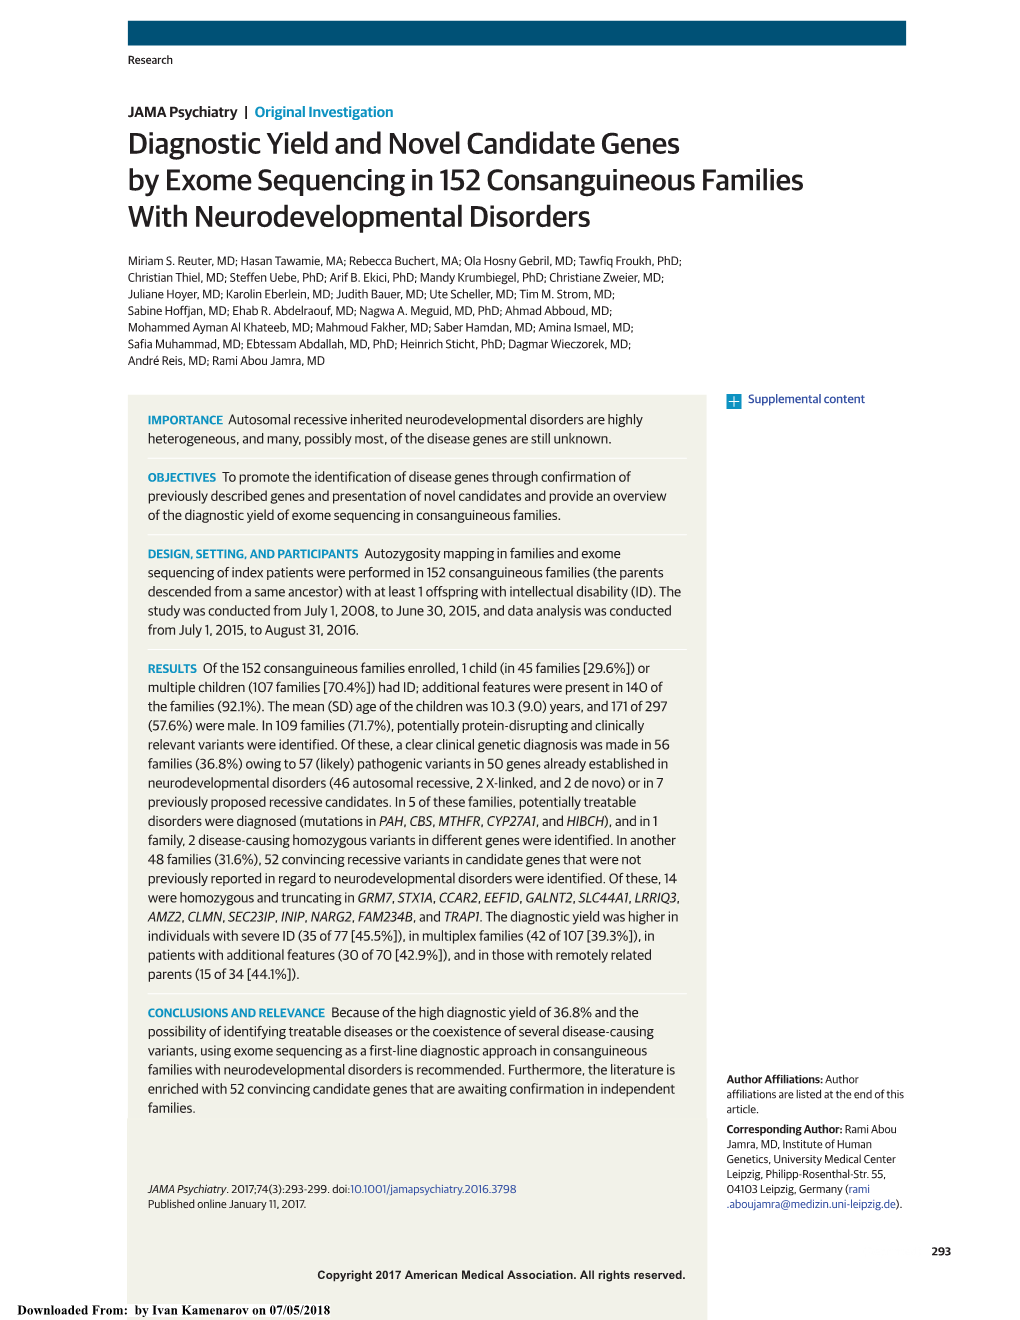 Diagnostic Yield and Novel Candidate Genes by Exome Sequencing in 152 Consanguineous Families with Neurodevelopmental Disorders